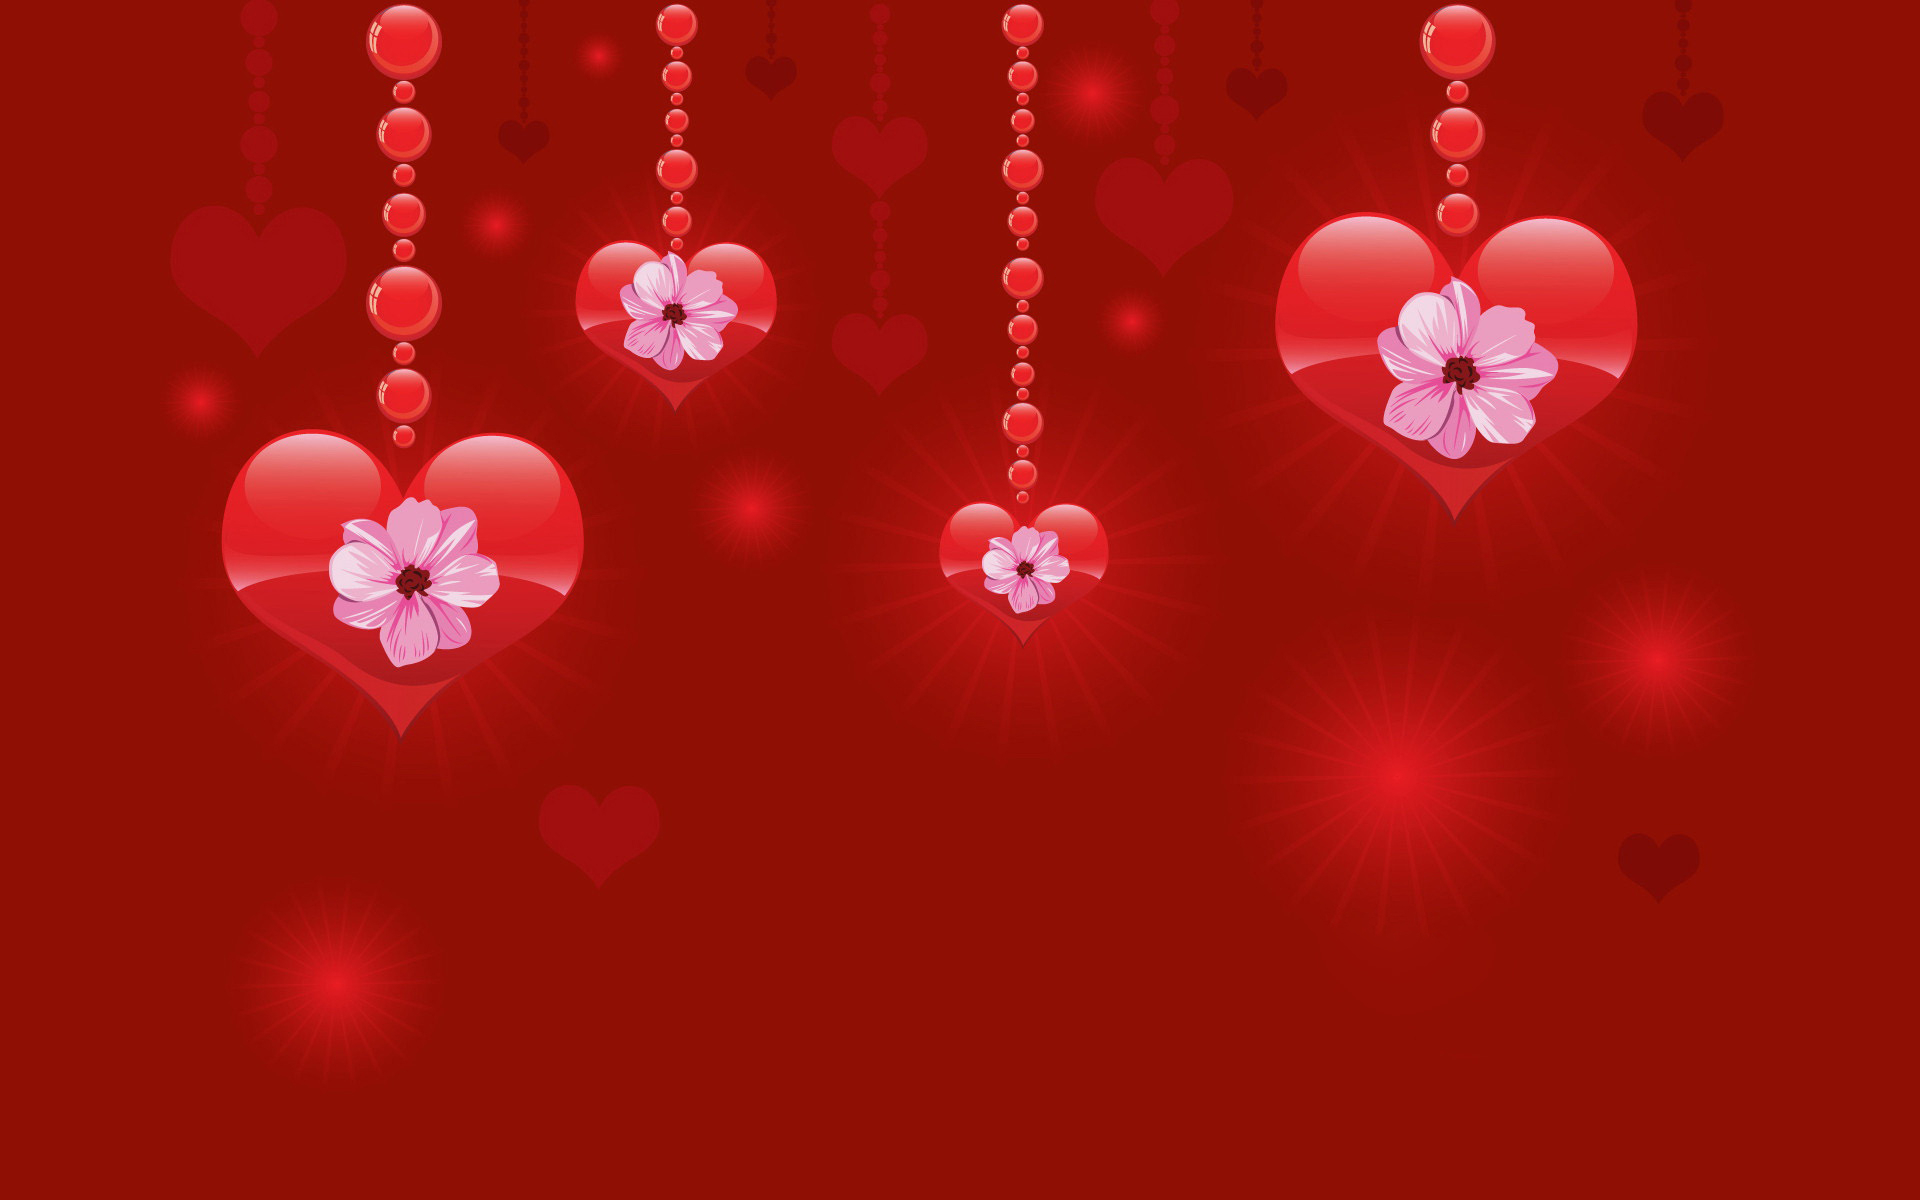 High Quality Valentines Day Wallpaper - Christian Valentines Day Message - HD Wallpaper 